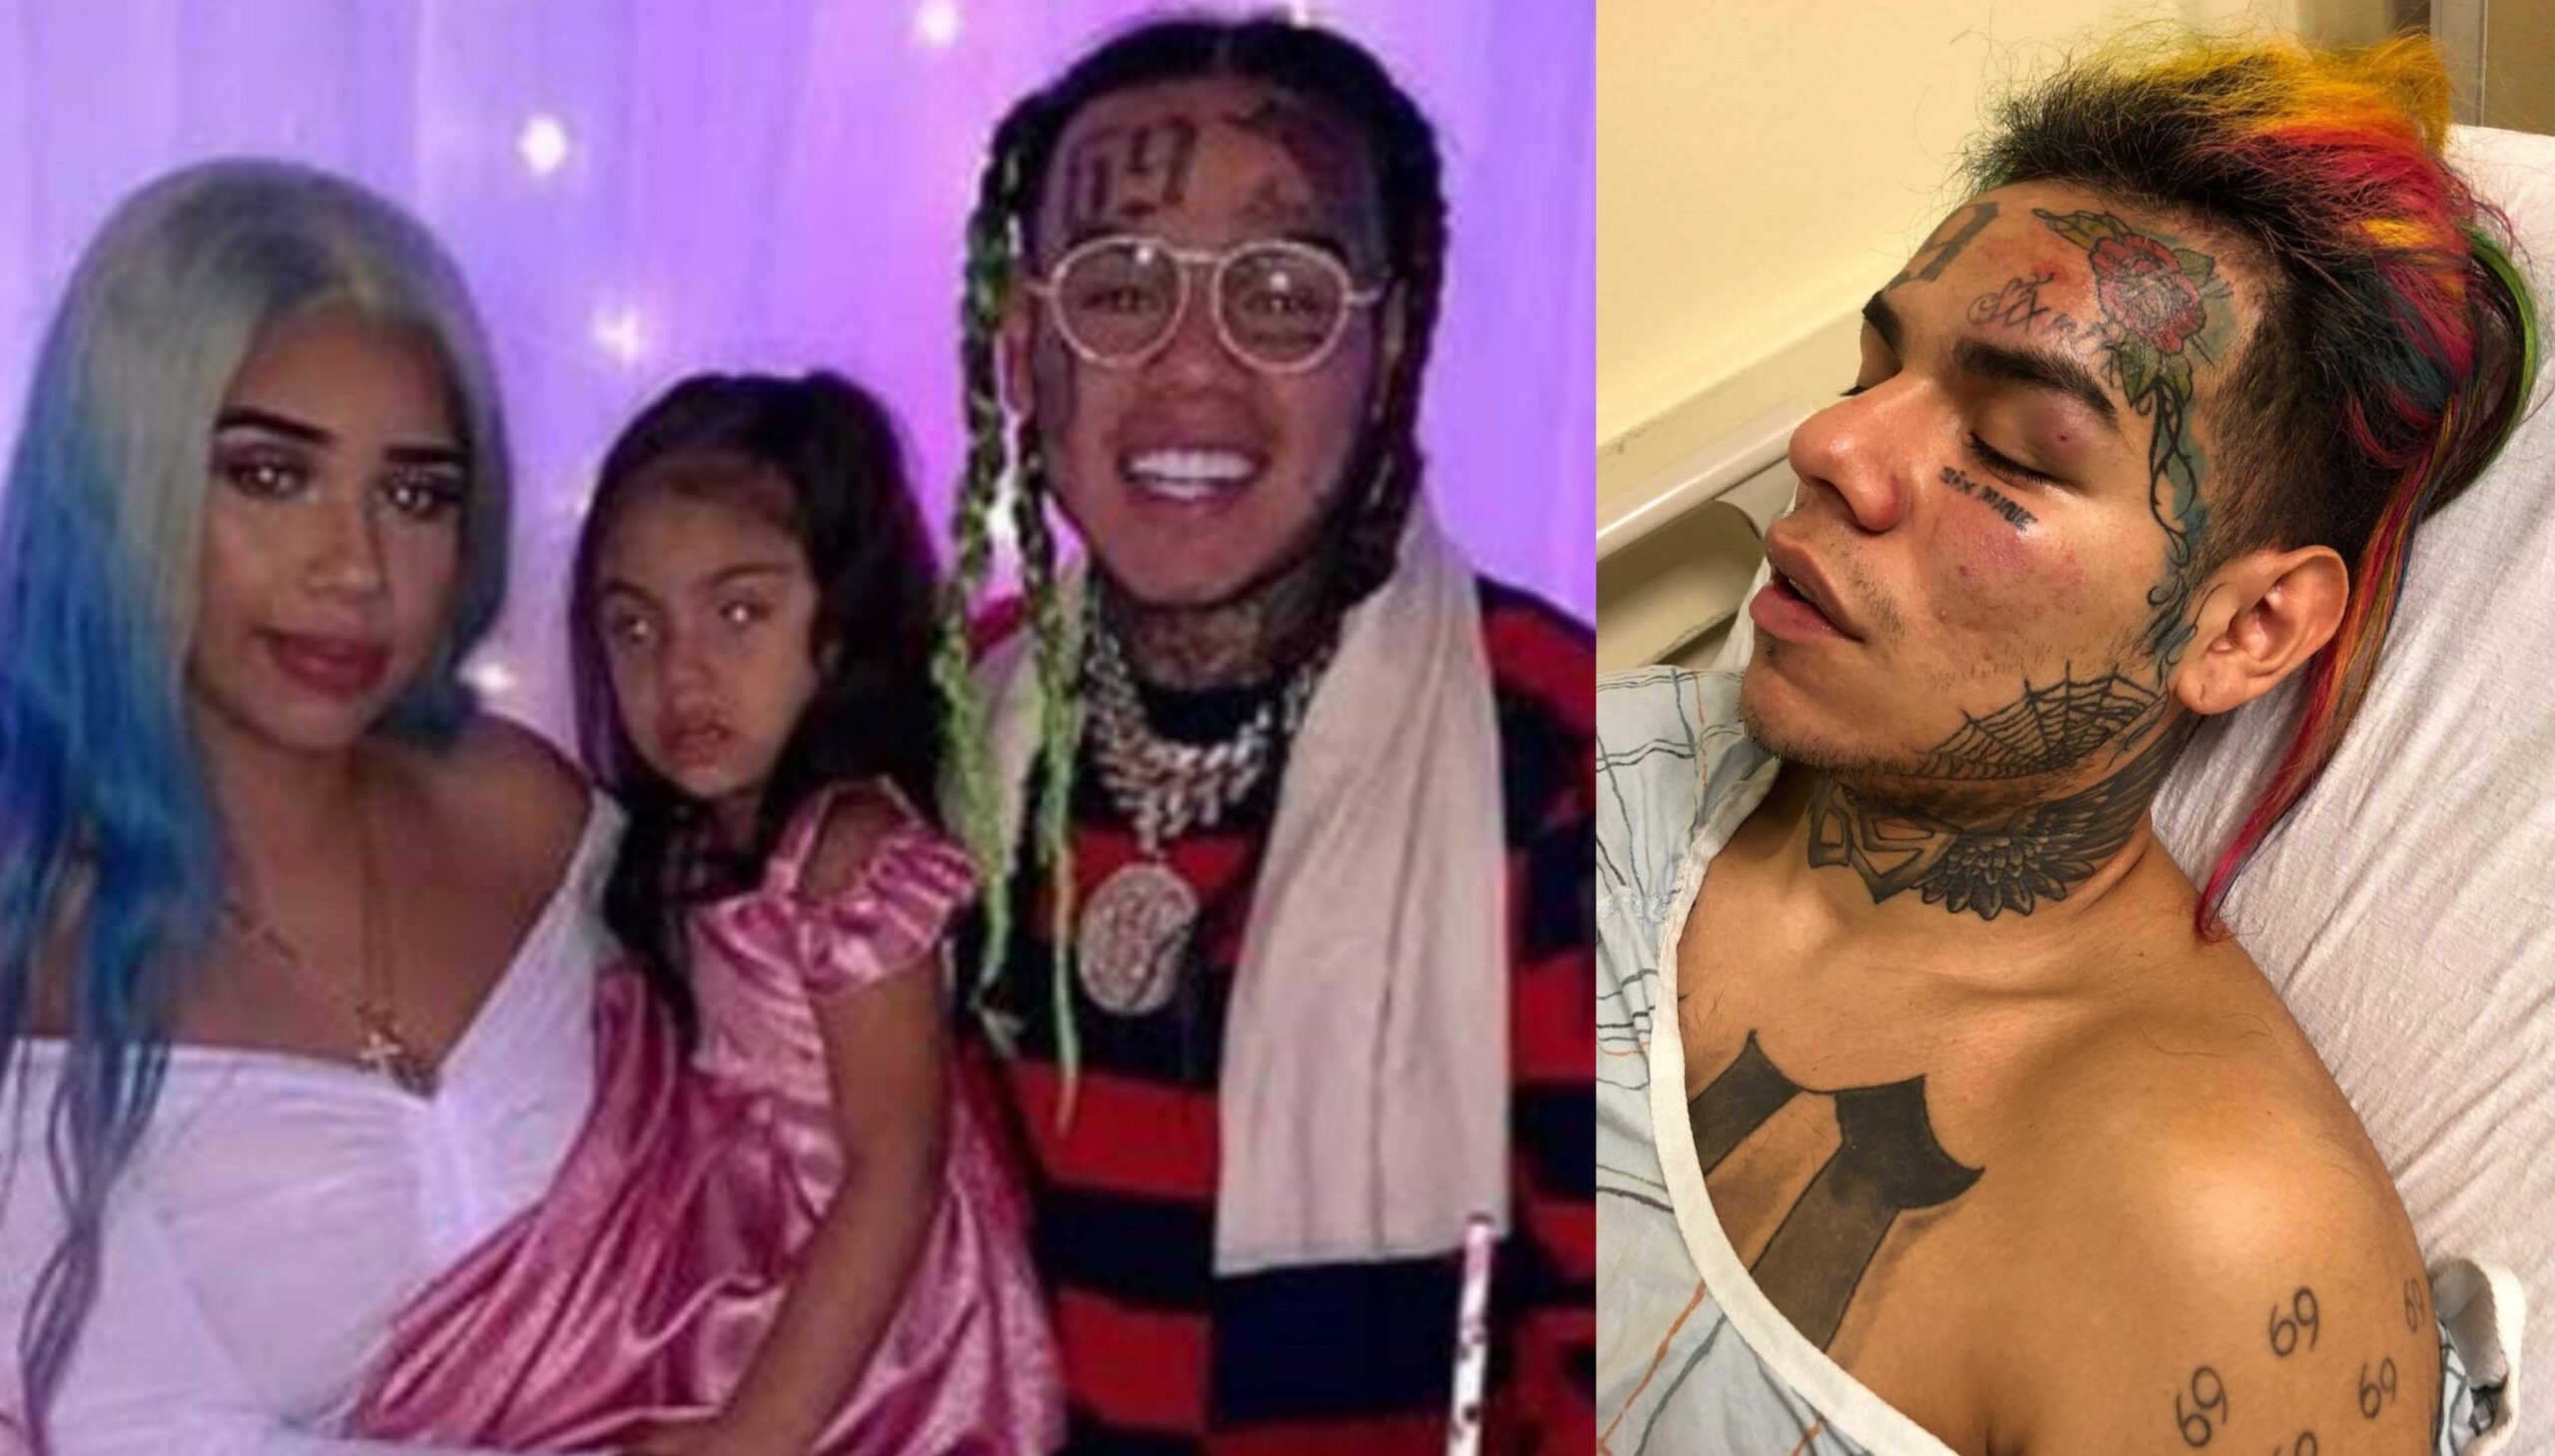 Photoshop Expert Removes 6ix9ine's Tattoos And Long Hair | This Photoshop  expert completely transforms 6ix9ine 😲👏 Mitchell Wiggs | By UNILAD |  Facebook